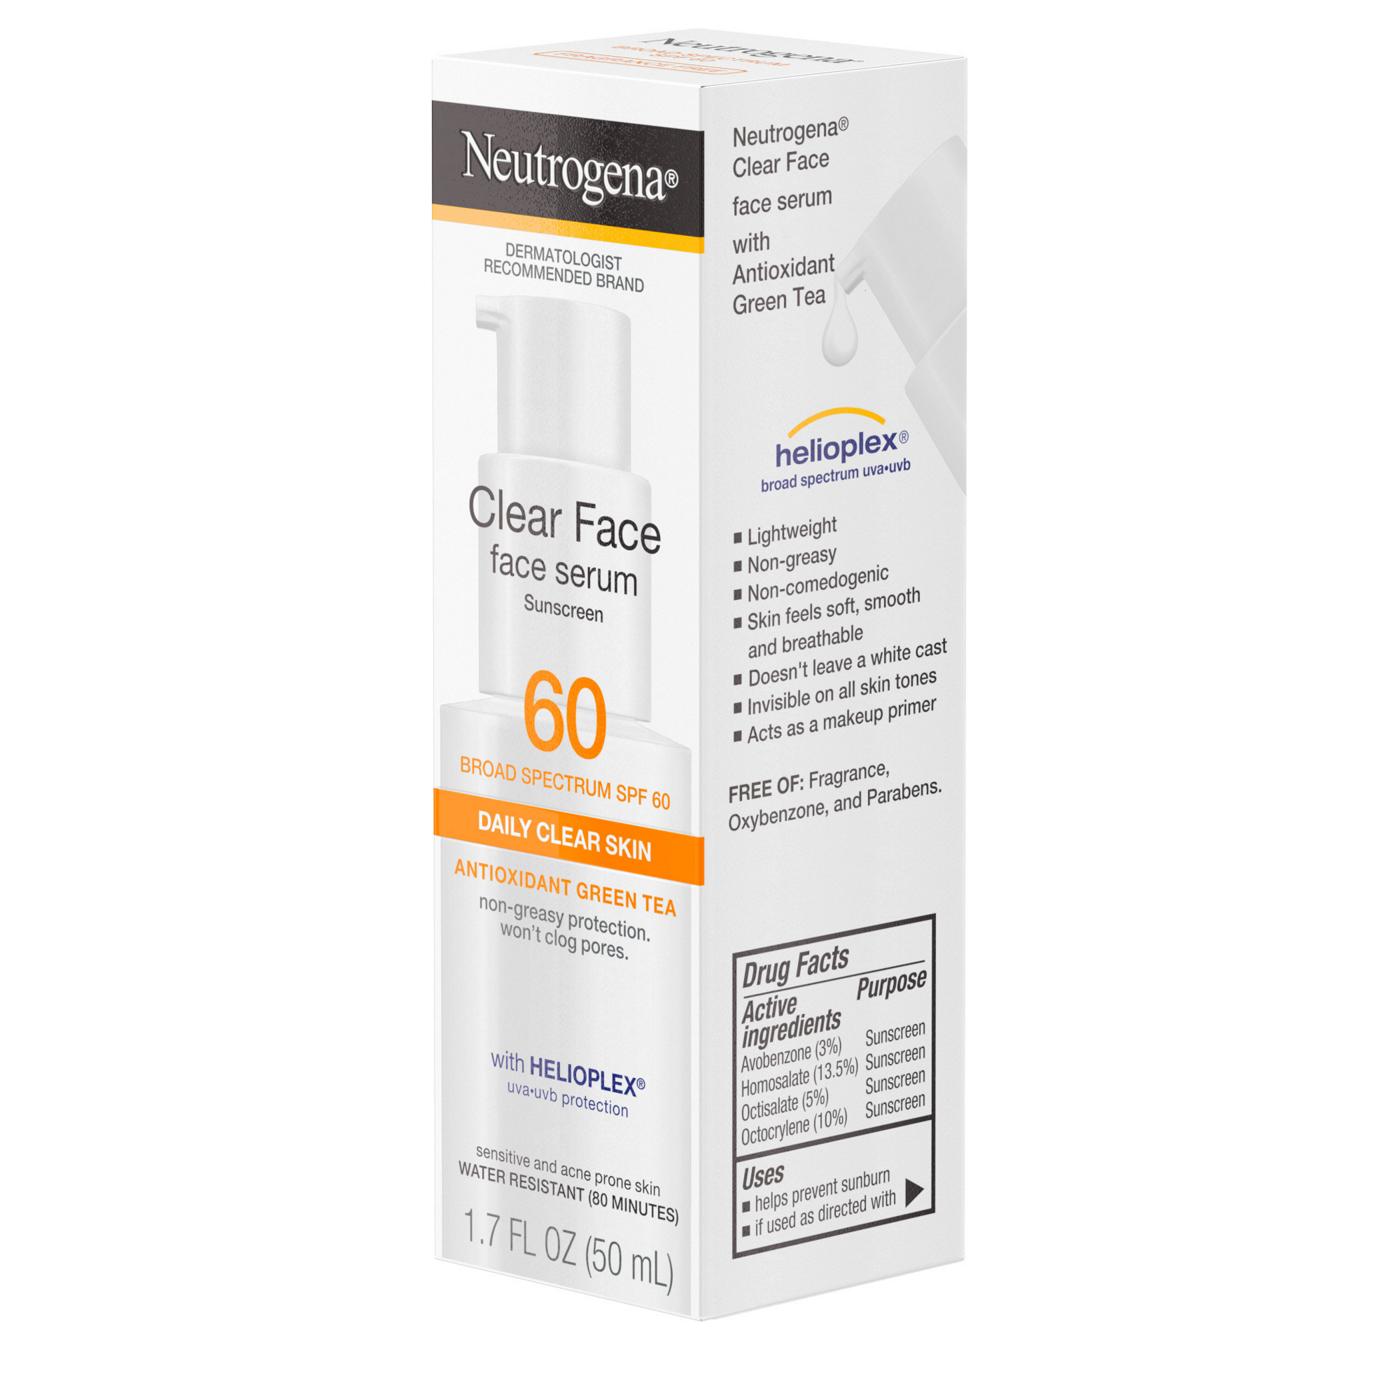 Neutrogena Clear Face Serum Sunscreen With Green Tea Broad Spectrum SPF 60+ Fragrance Free; image 4 of 8